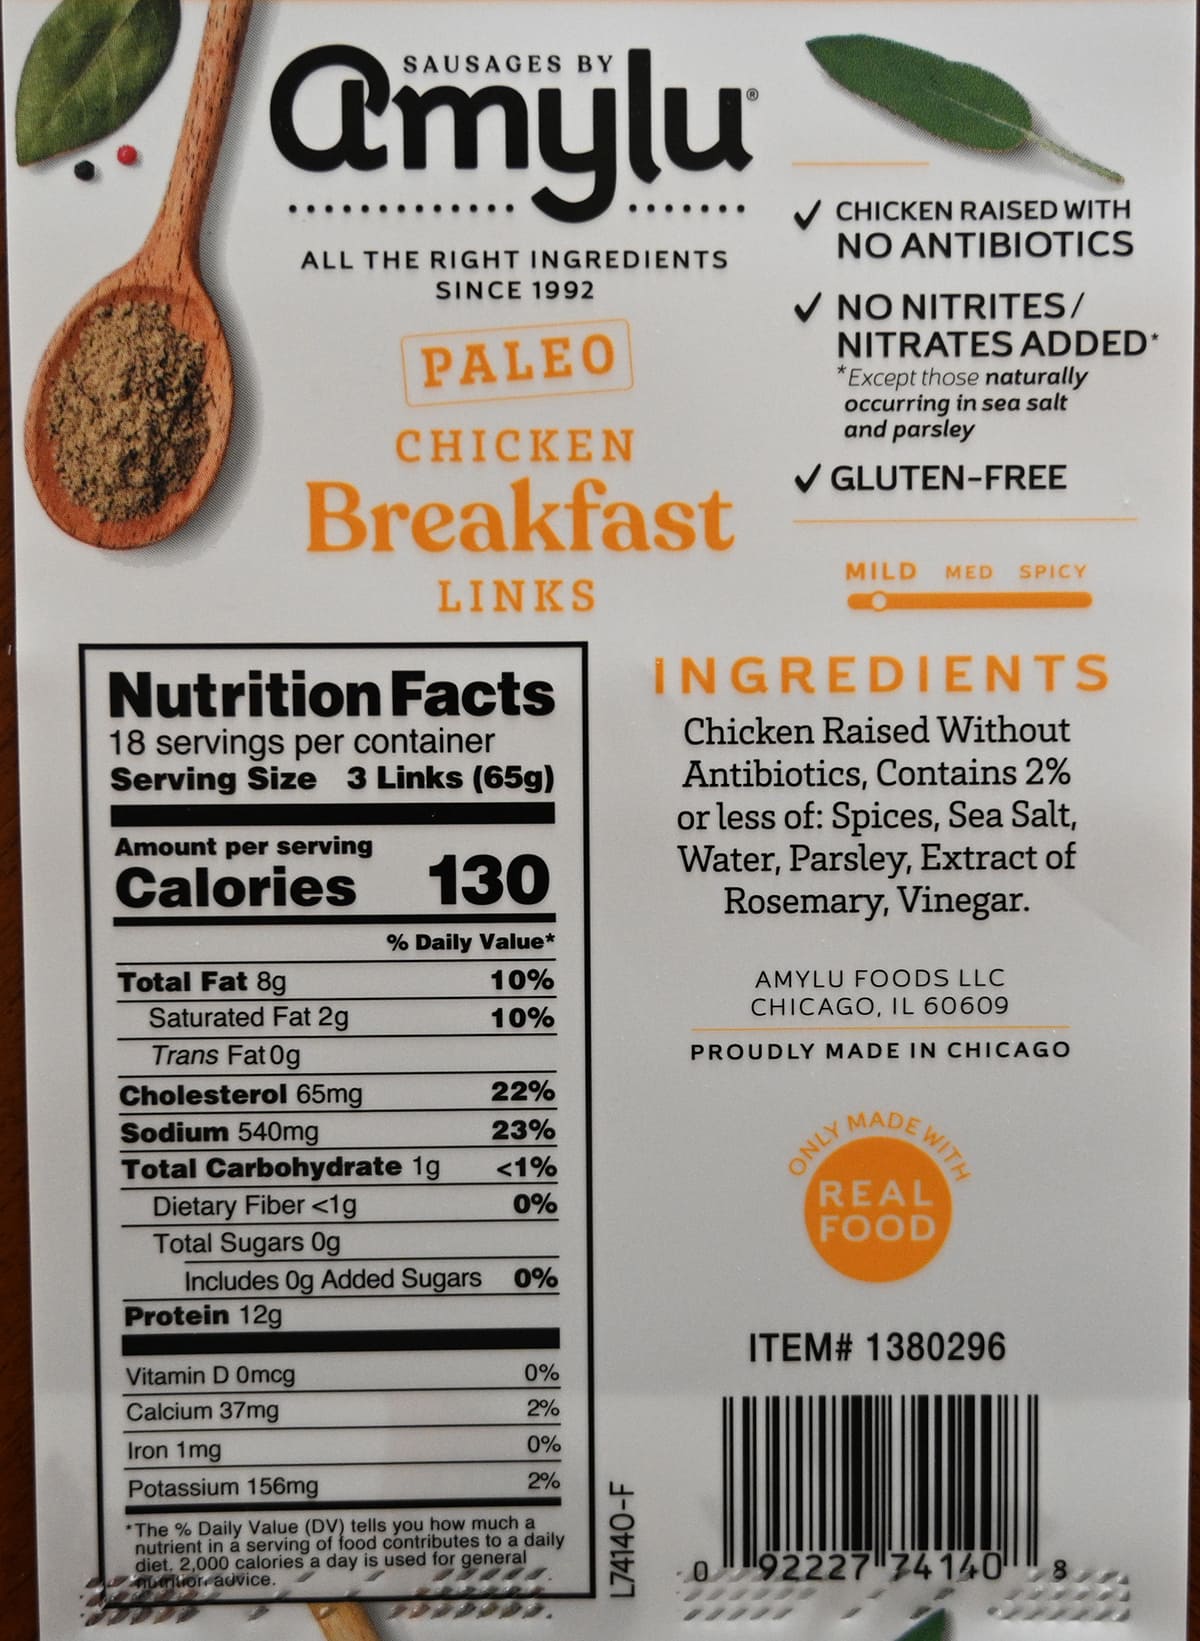 Image of the back of the package of the breakfast links with nutrition facts, ingredients.